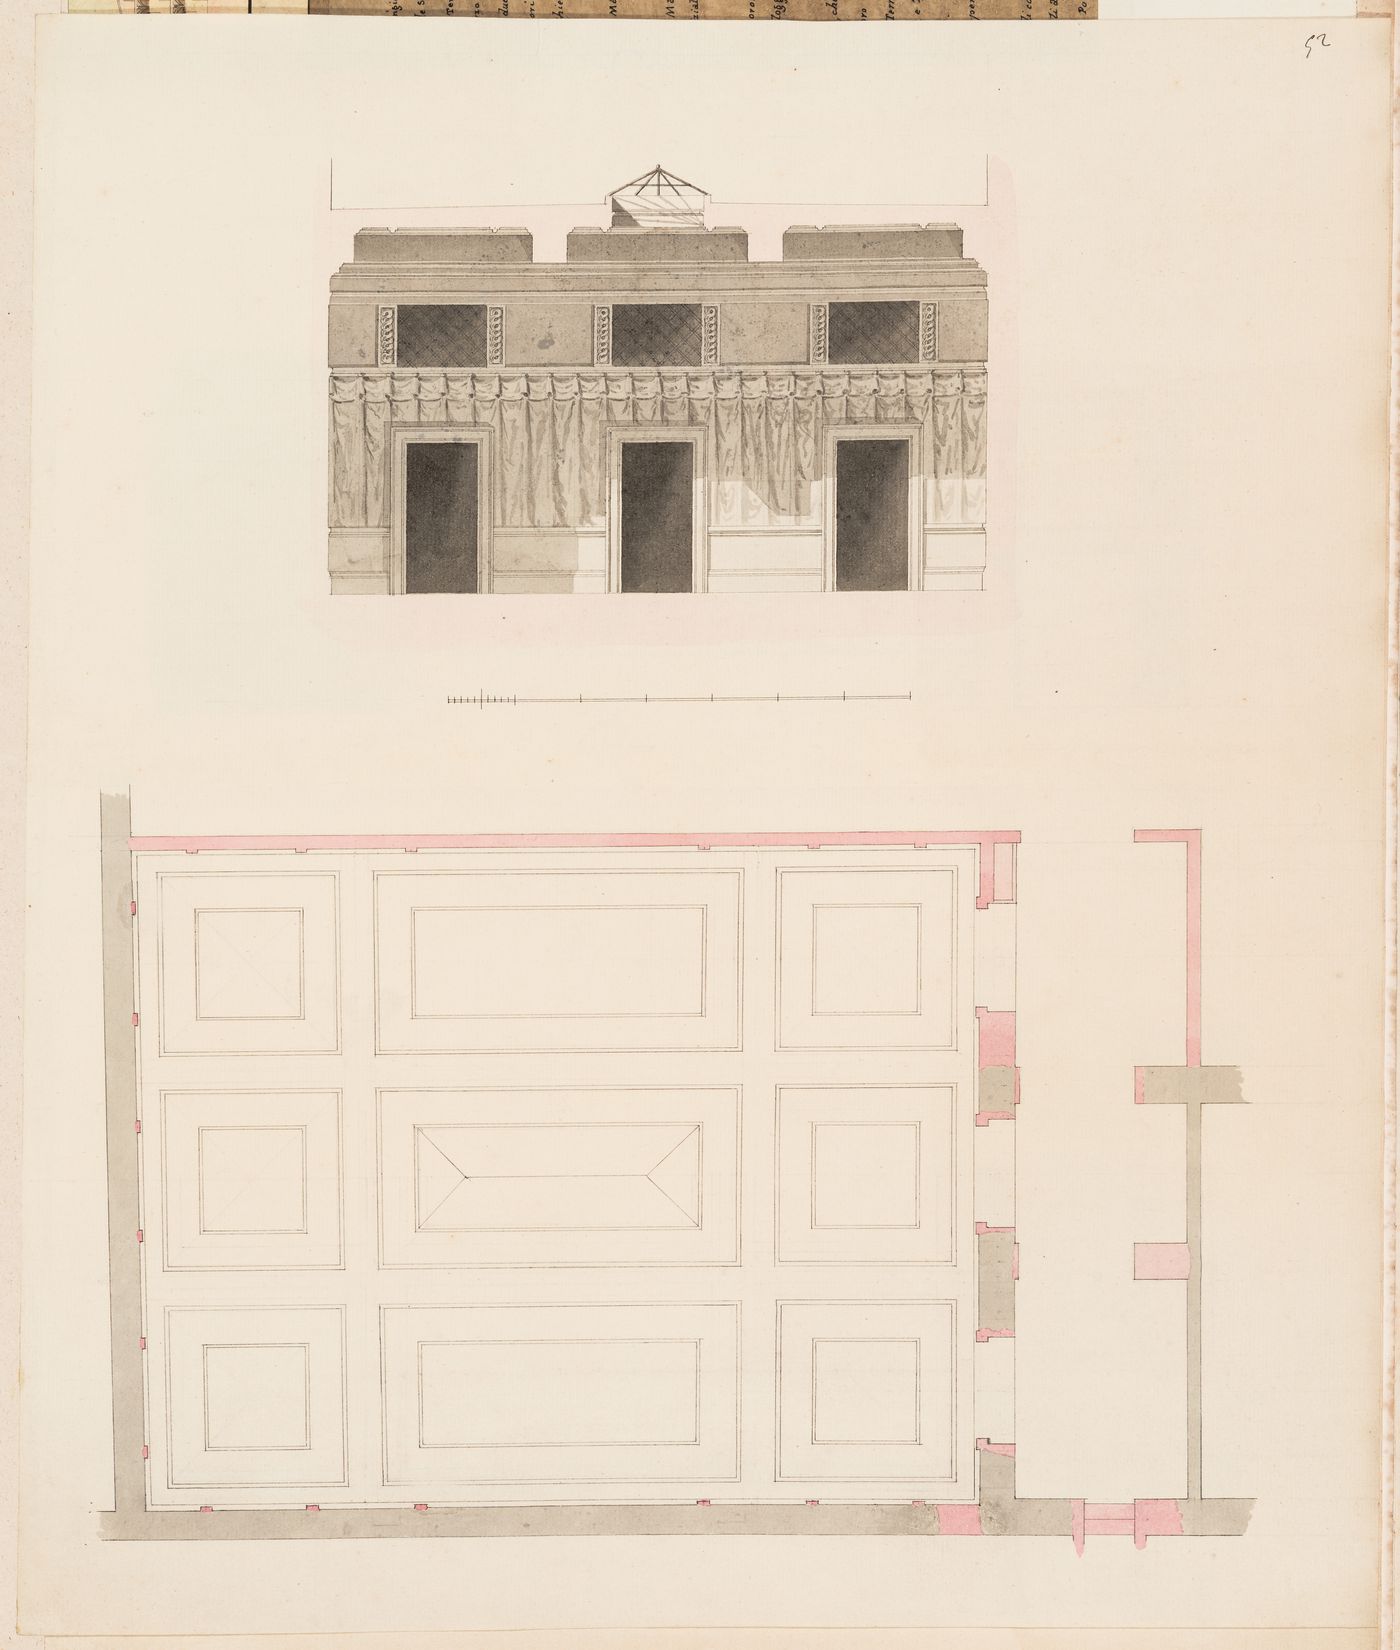 Project for the redevelopment of the École de médecine and surrounding area, Paris [?]: Cross section and reflected ceiling plan for a room for the Académie de médecine